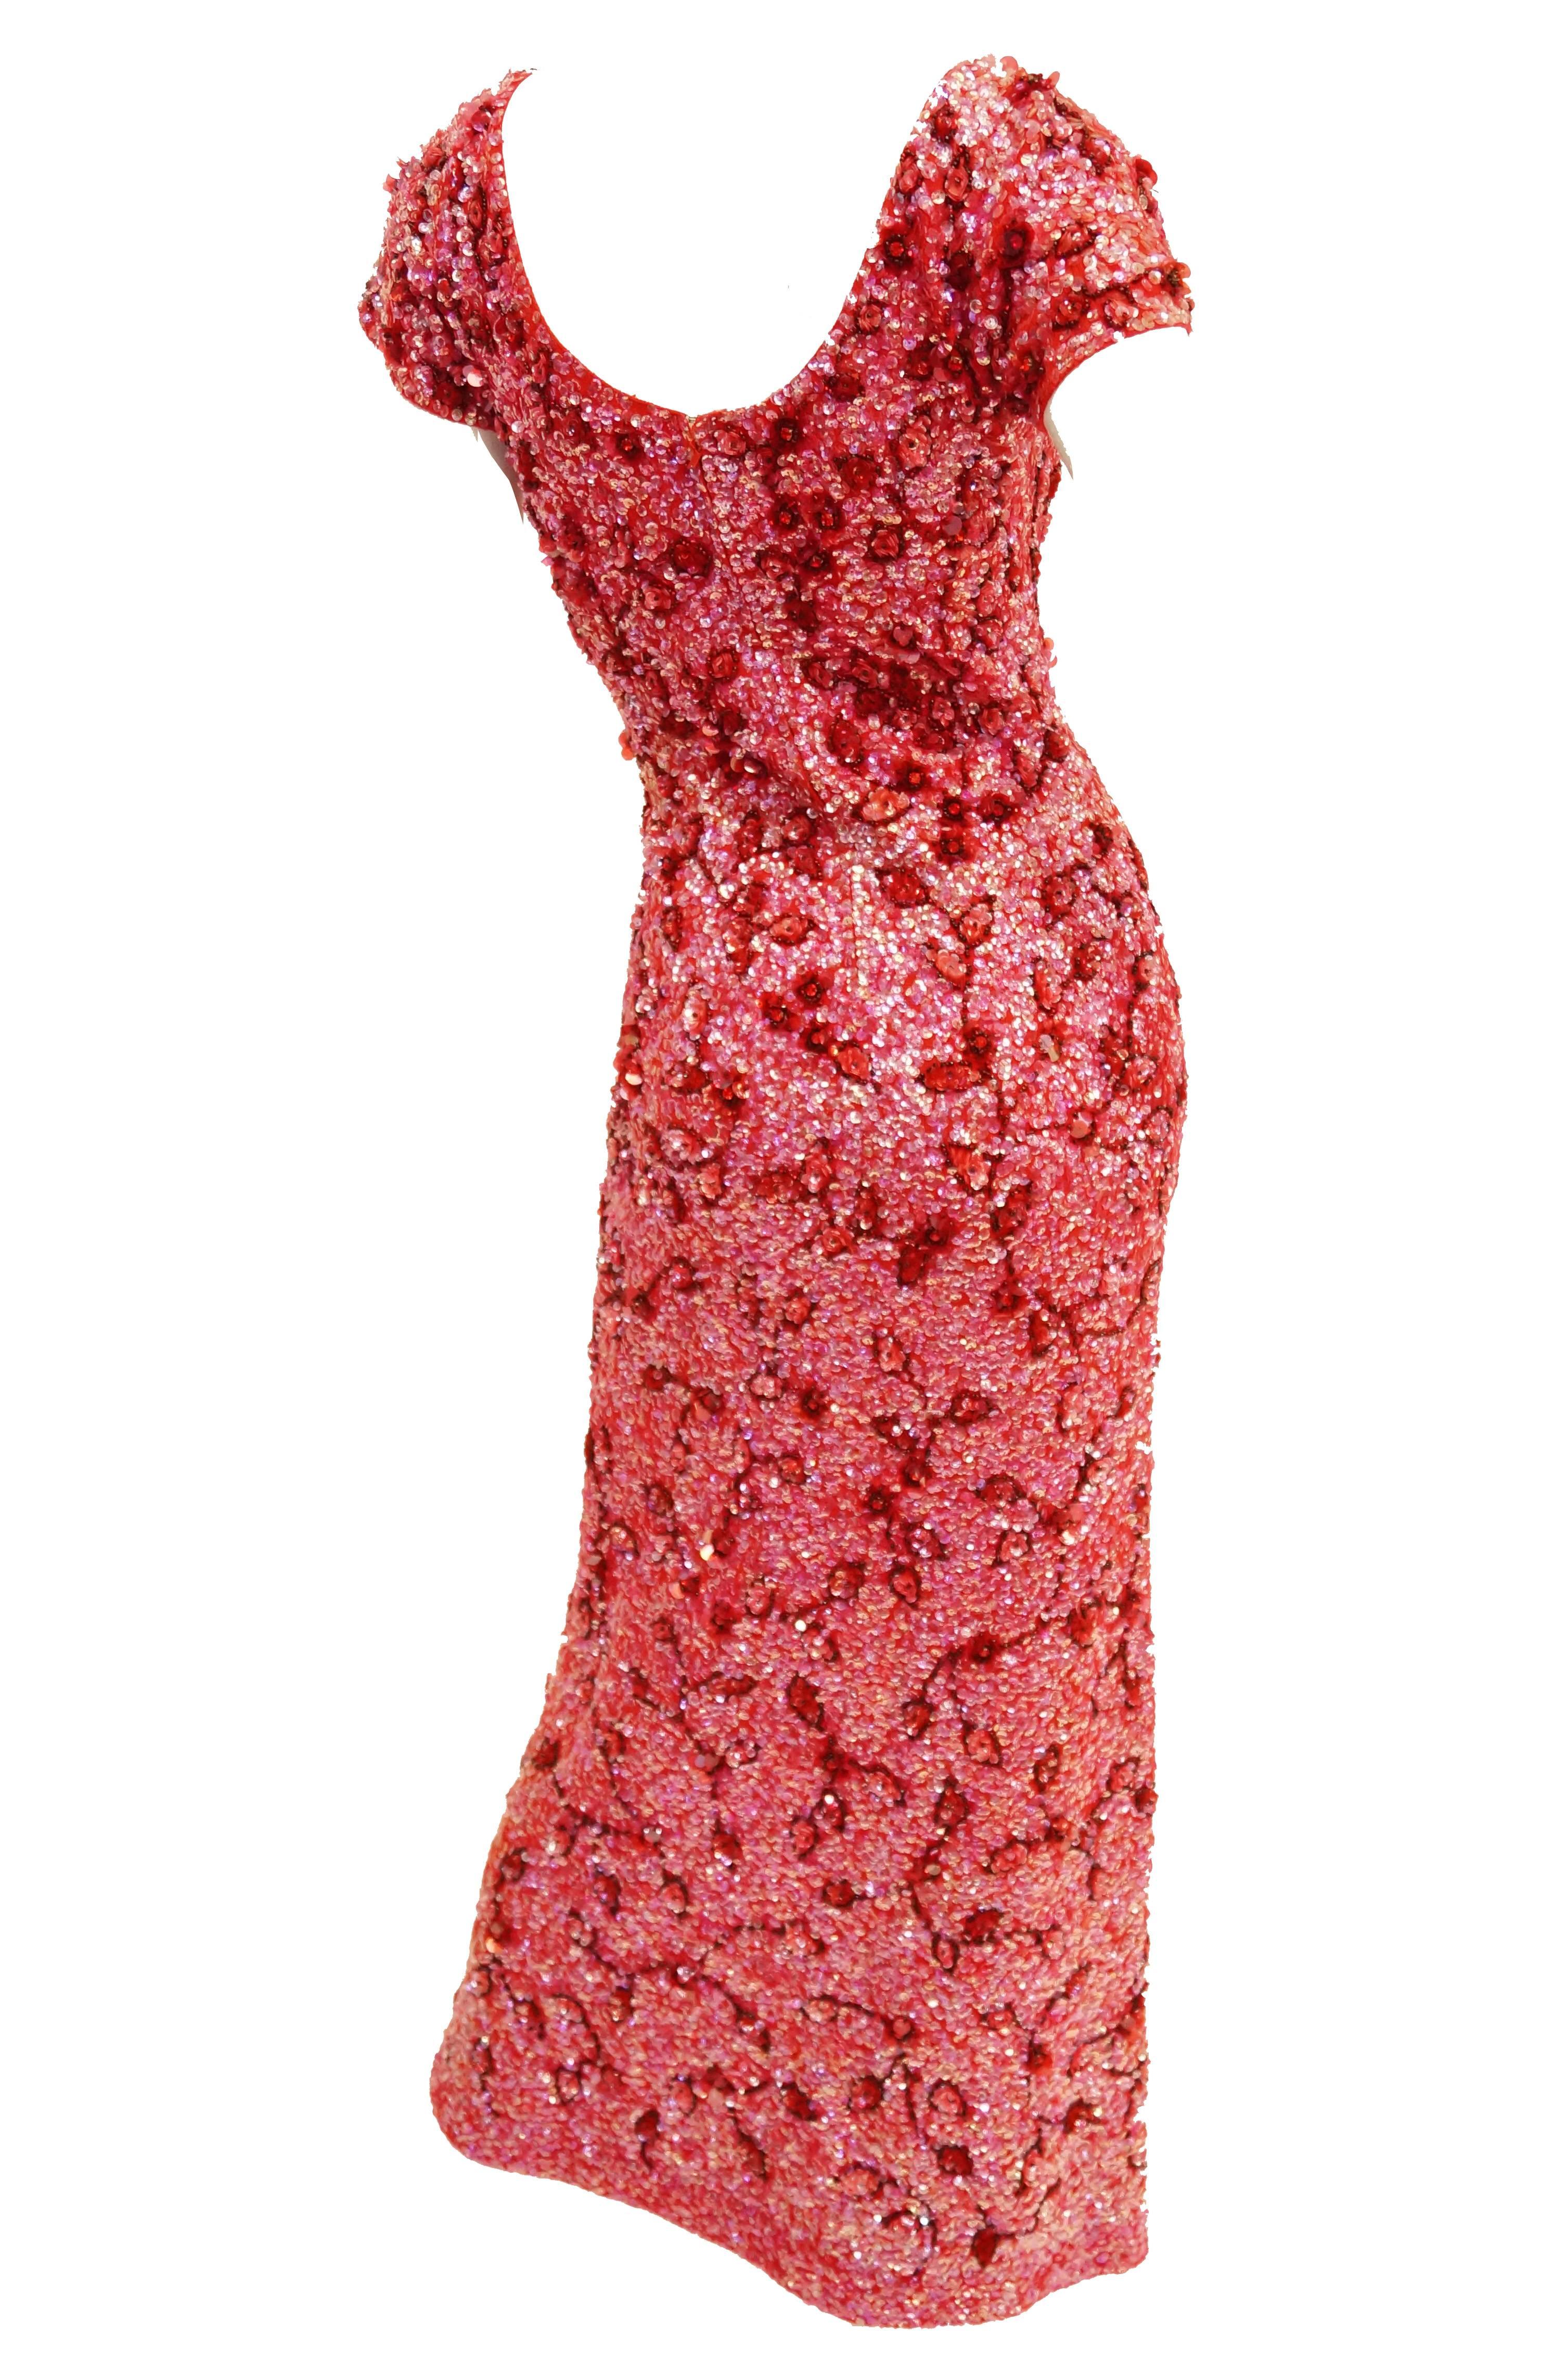 Resplendent curve - hugging sweater knit sequin dress. This mid century piece is maxi length, has short sleeves, a rounded collar, a medium scoop back, and a gently fluted skirt. The dress is fully sequined in playful red and pink iridescent floral